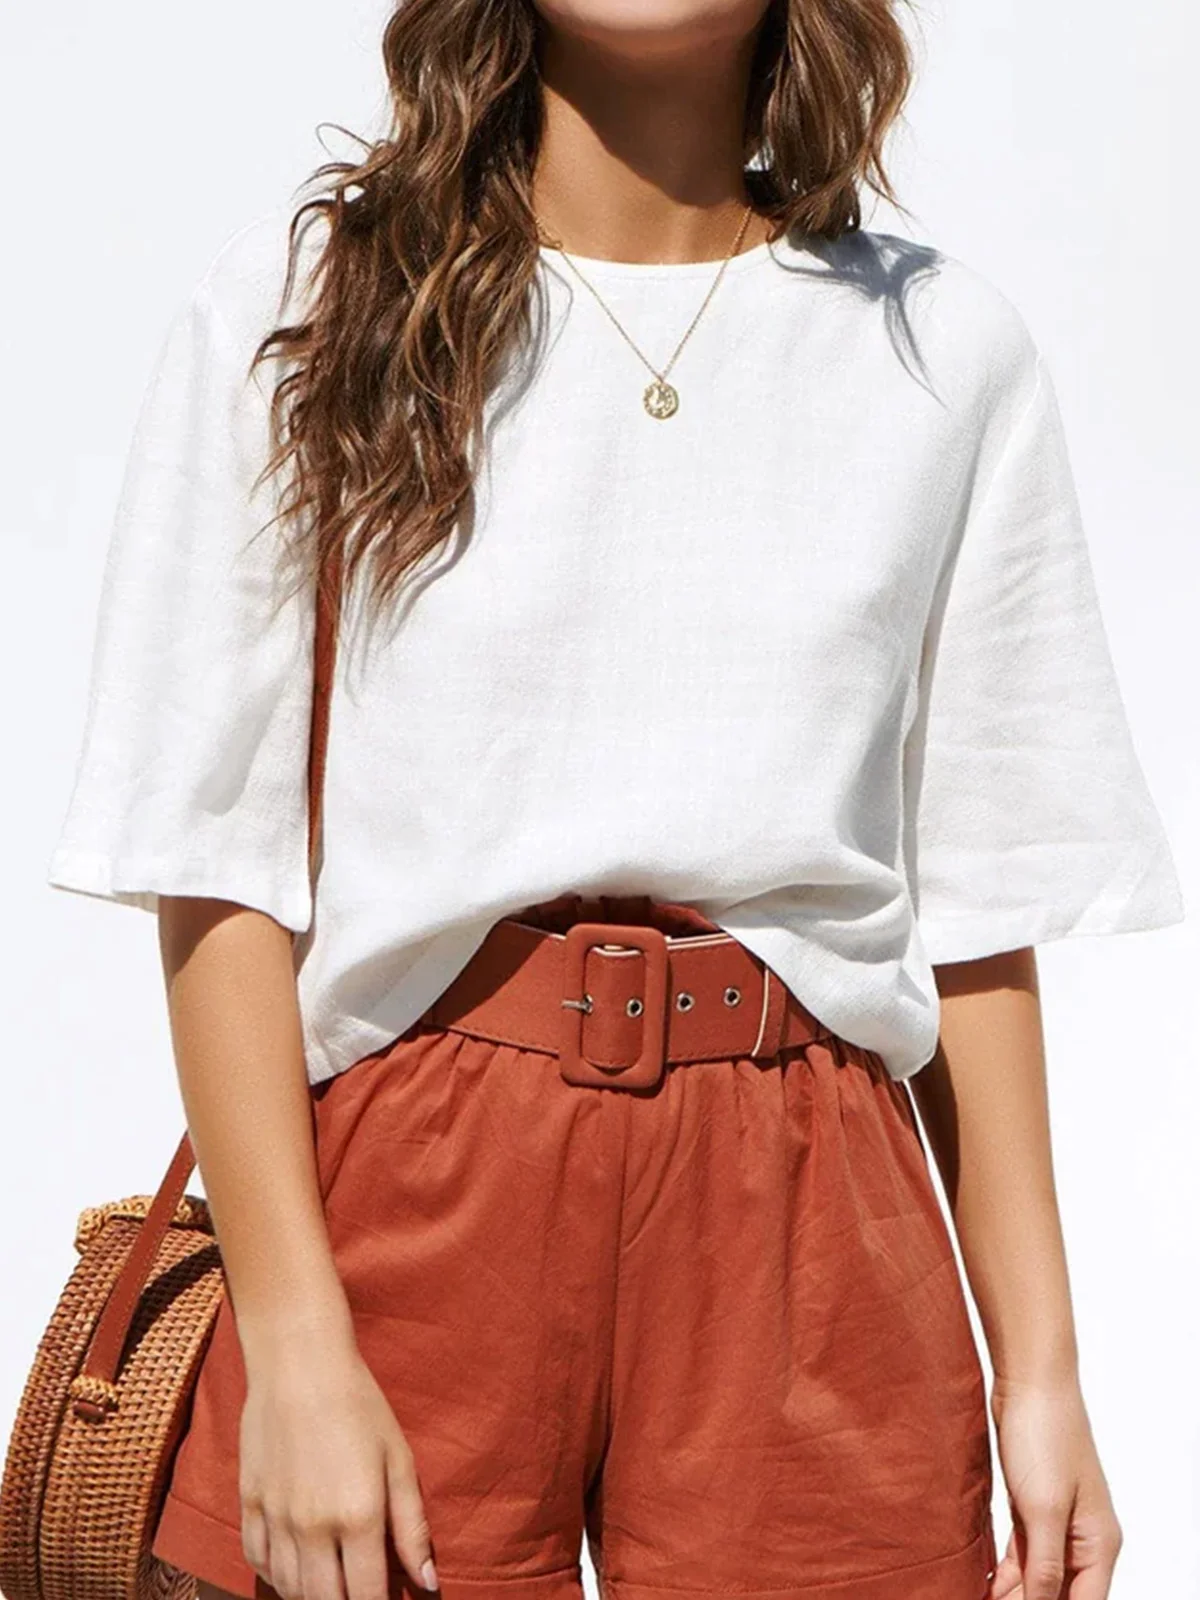 Women's Short Sleeve Blouse Summer Plain Buckle Cotton Crew Neck Daily Going Out Casual Top White